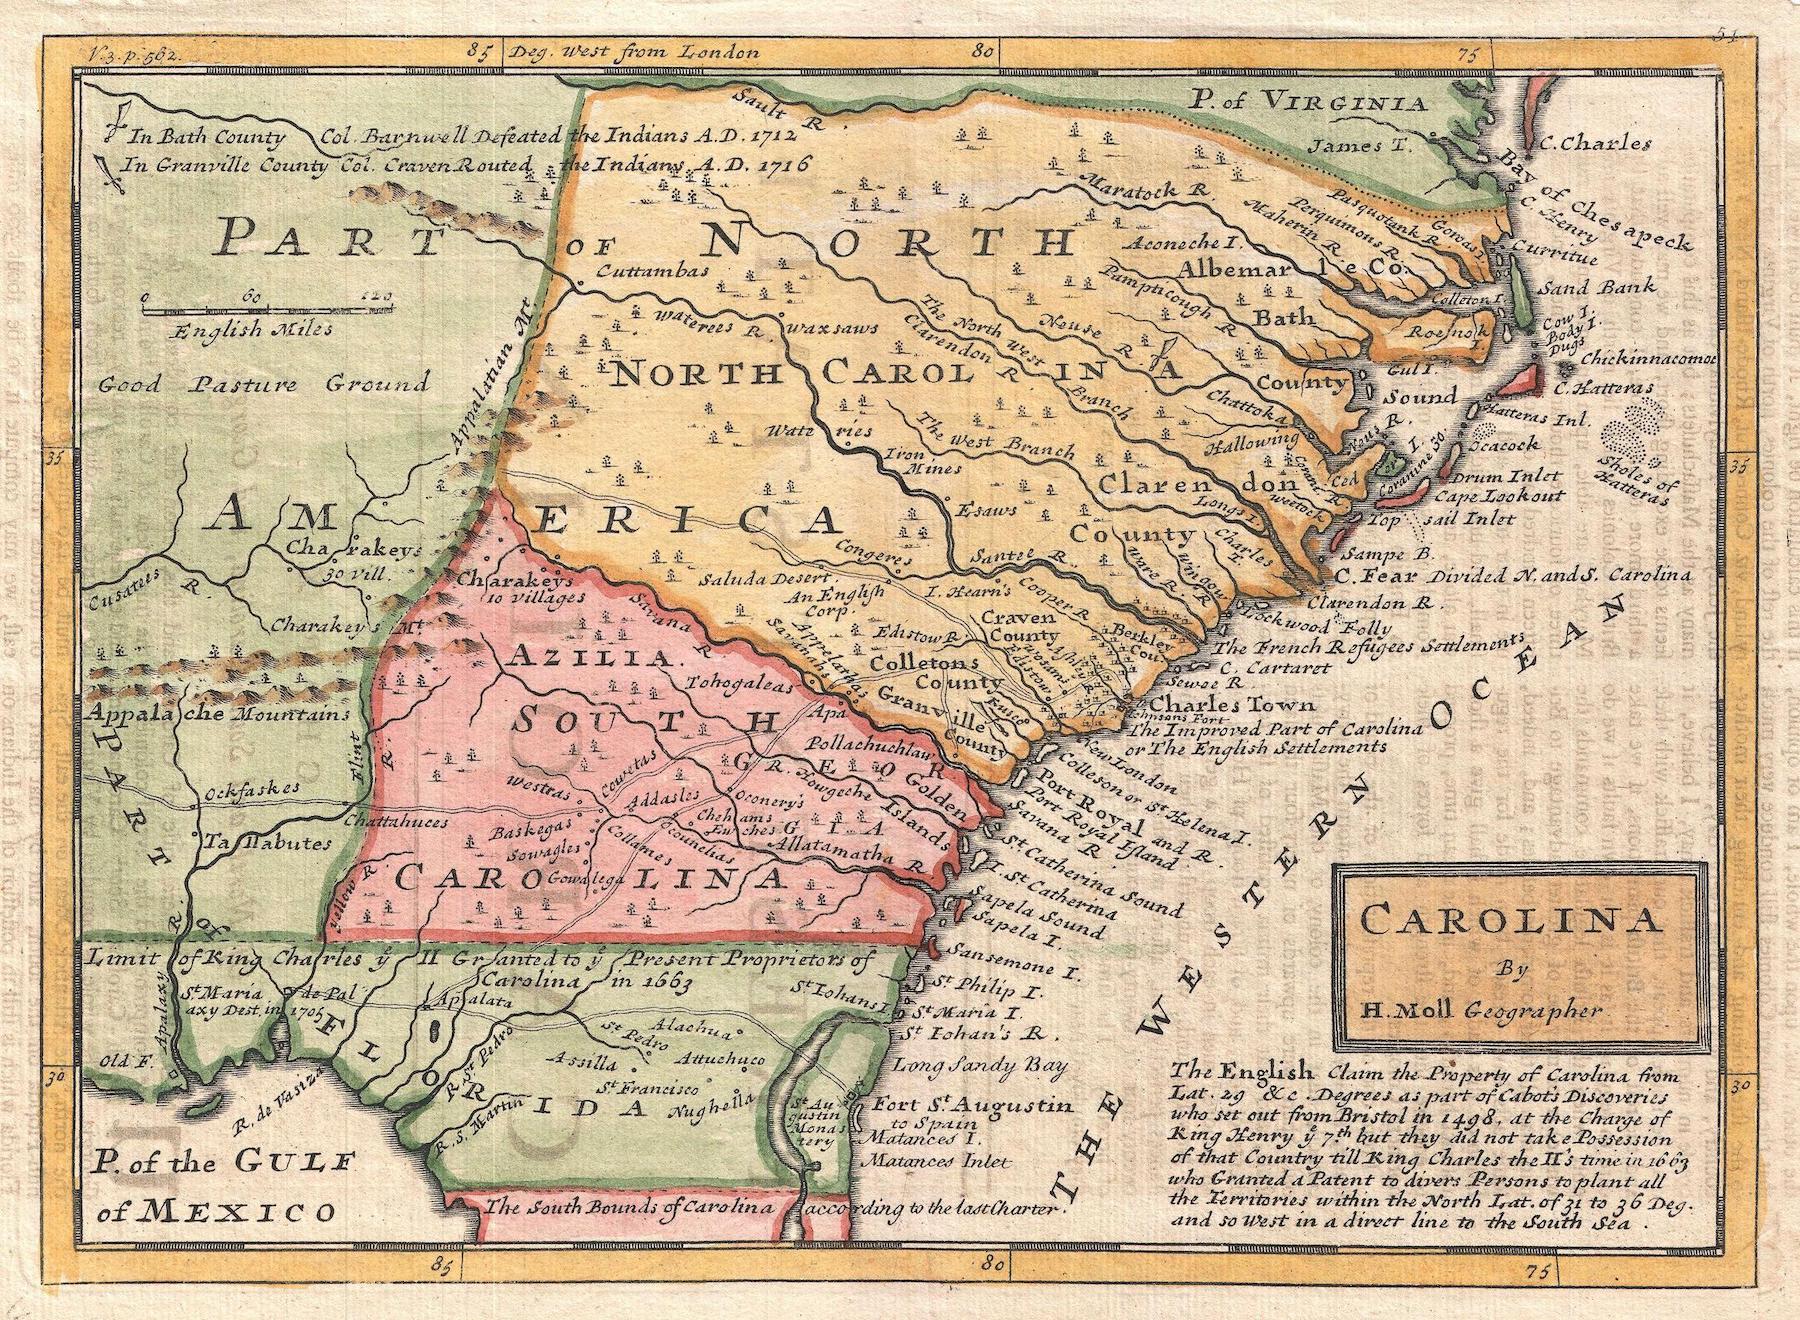 Anglo-Spanish Hostility in Early South Carolina, 1670–1748